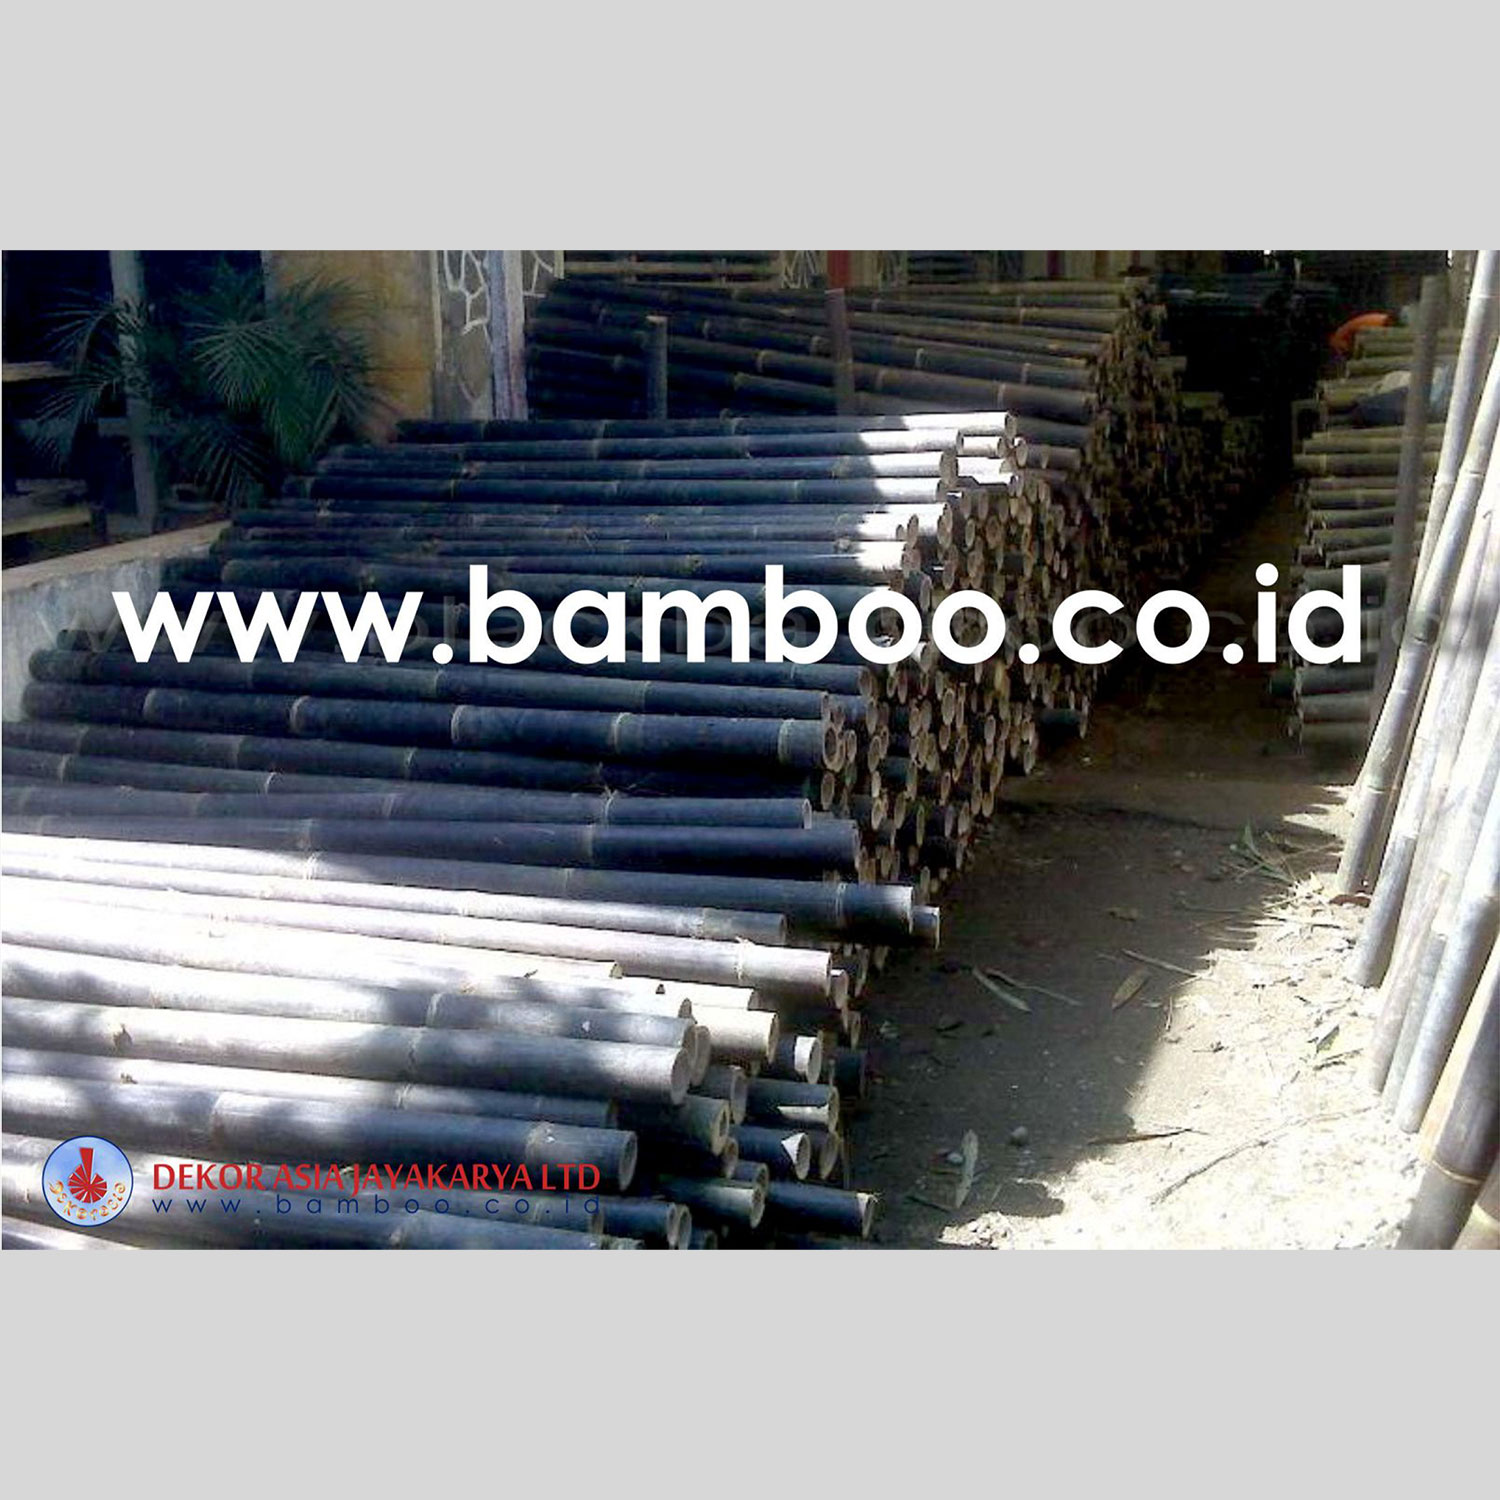 Black Bamboo Poles for Bamboo Fences and Bamboo Panels